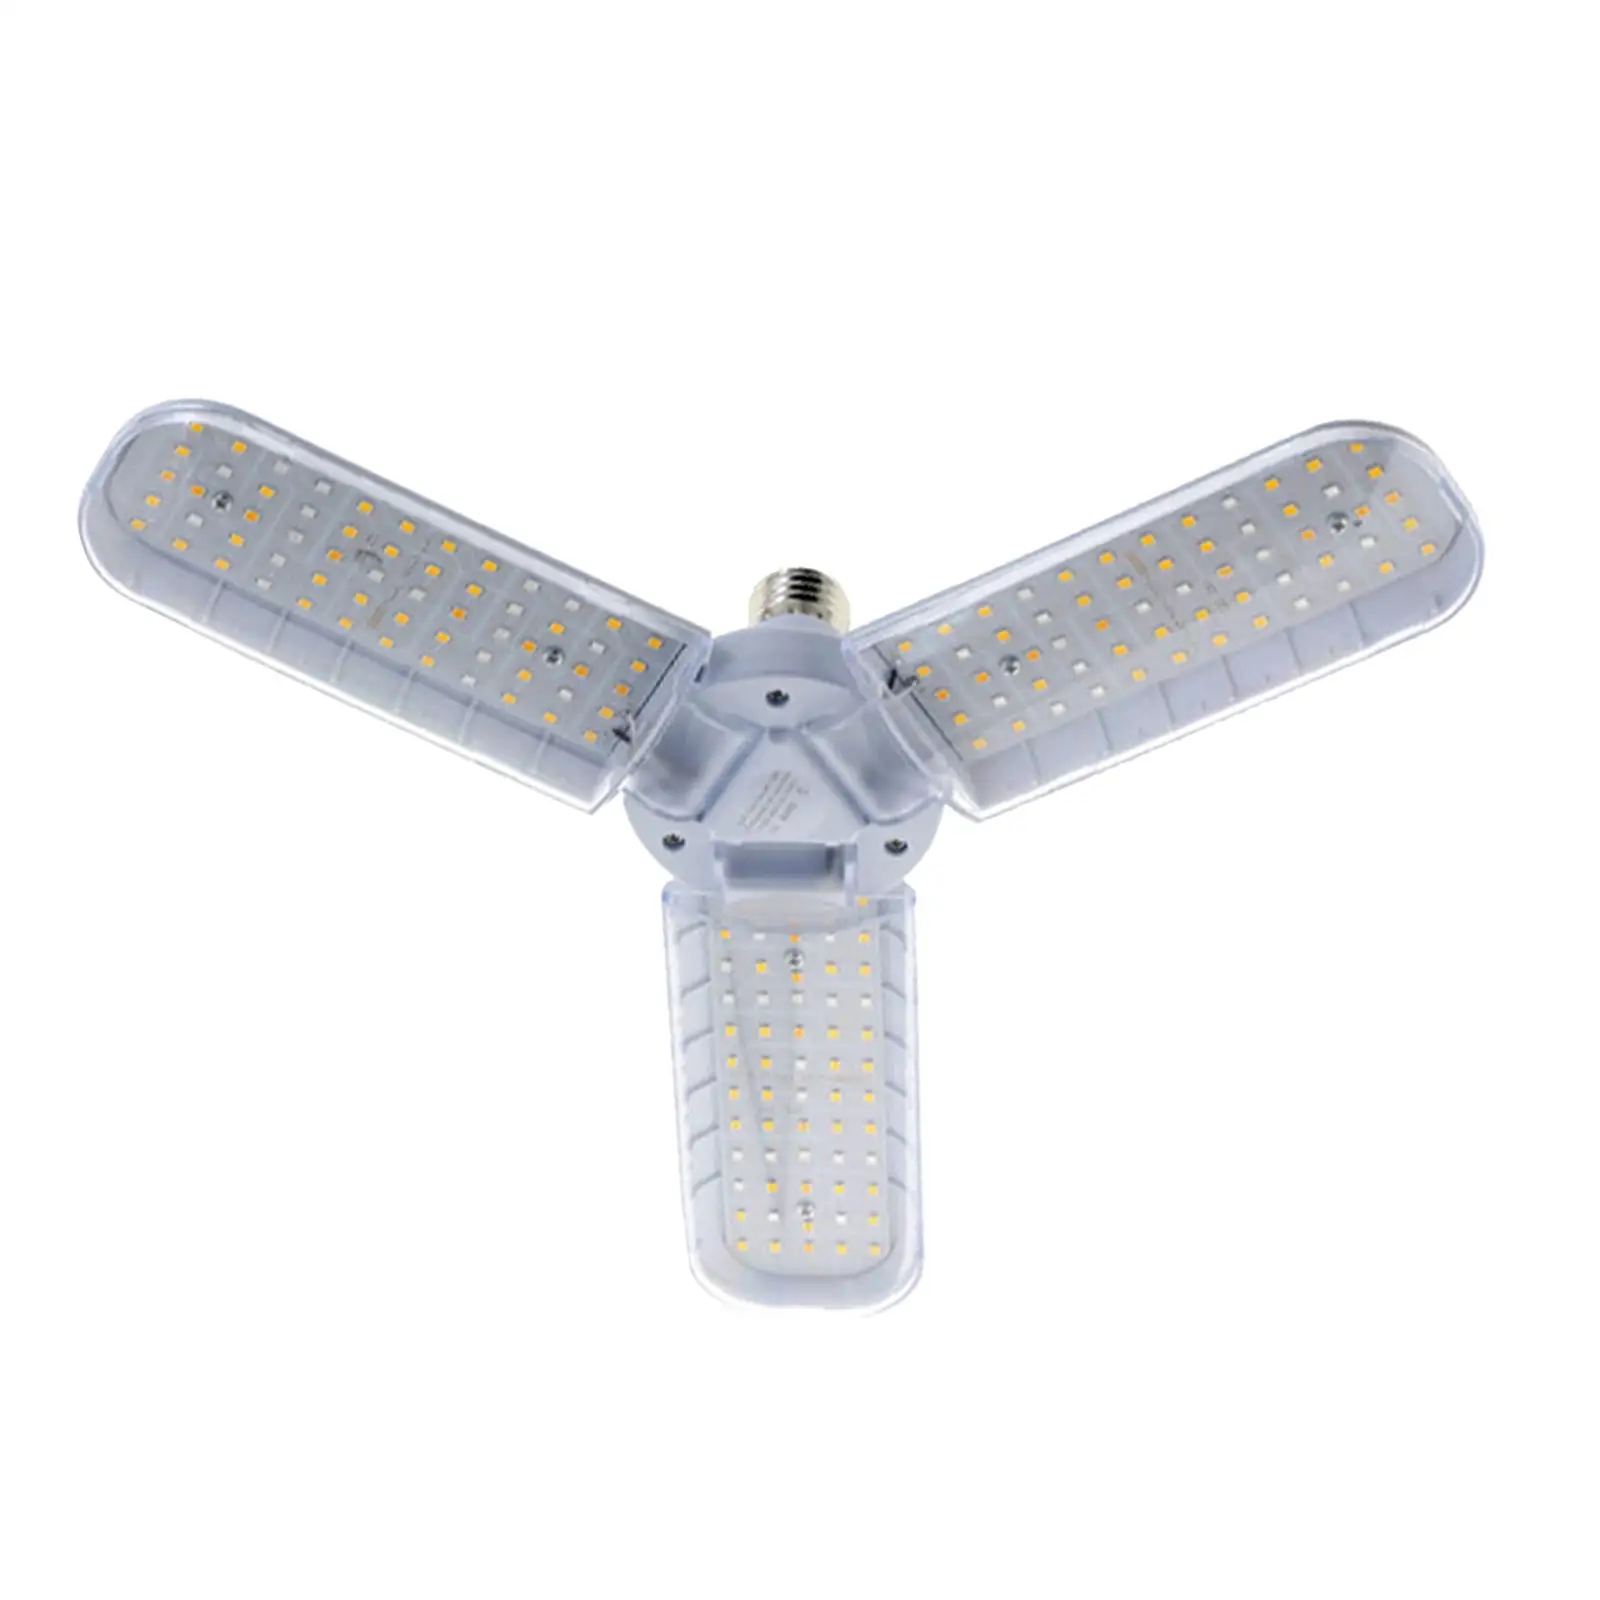 LED Foldable Grow Light Growing Lamp E27 Base Full Spectrum Grow Bulb for Plant Succulent Seed Vegetables Greenhouse